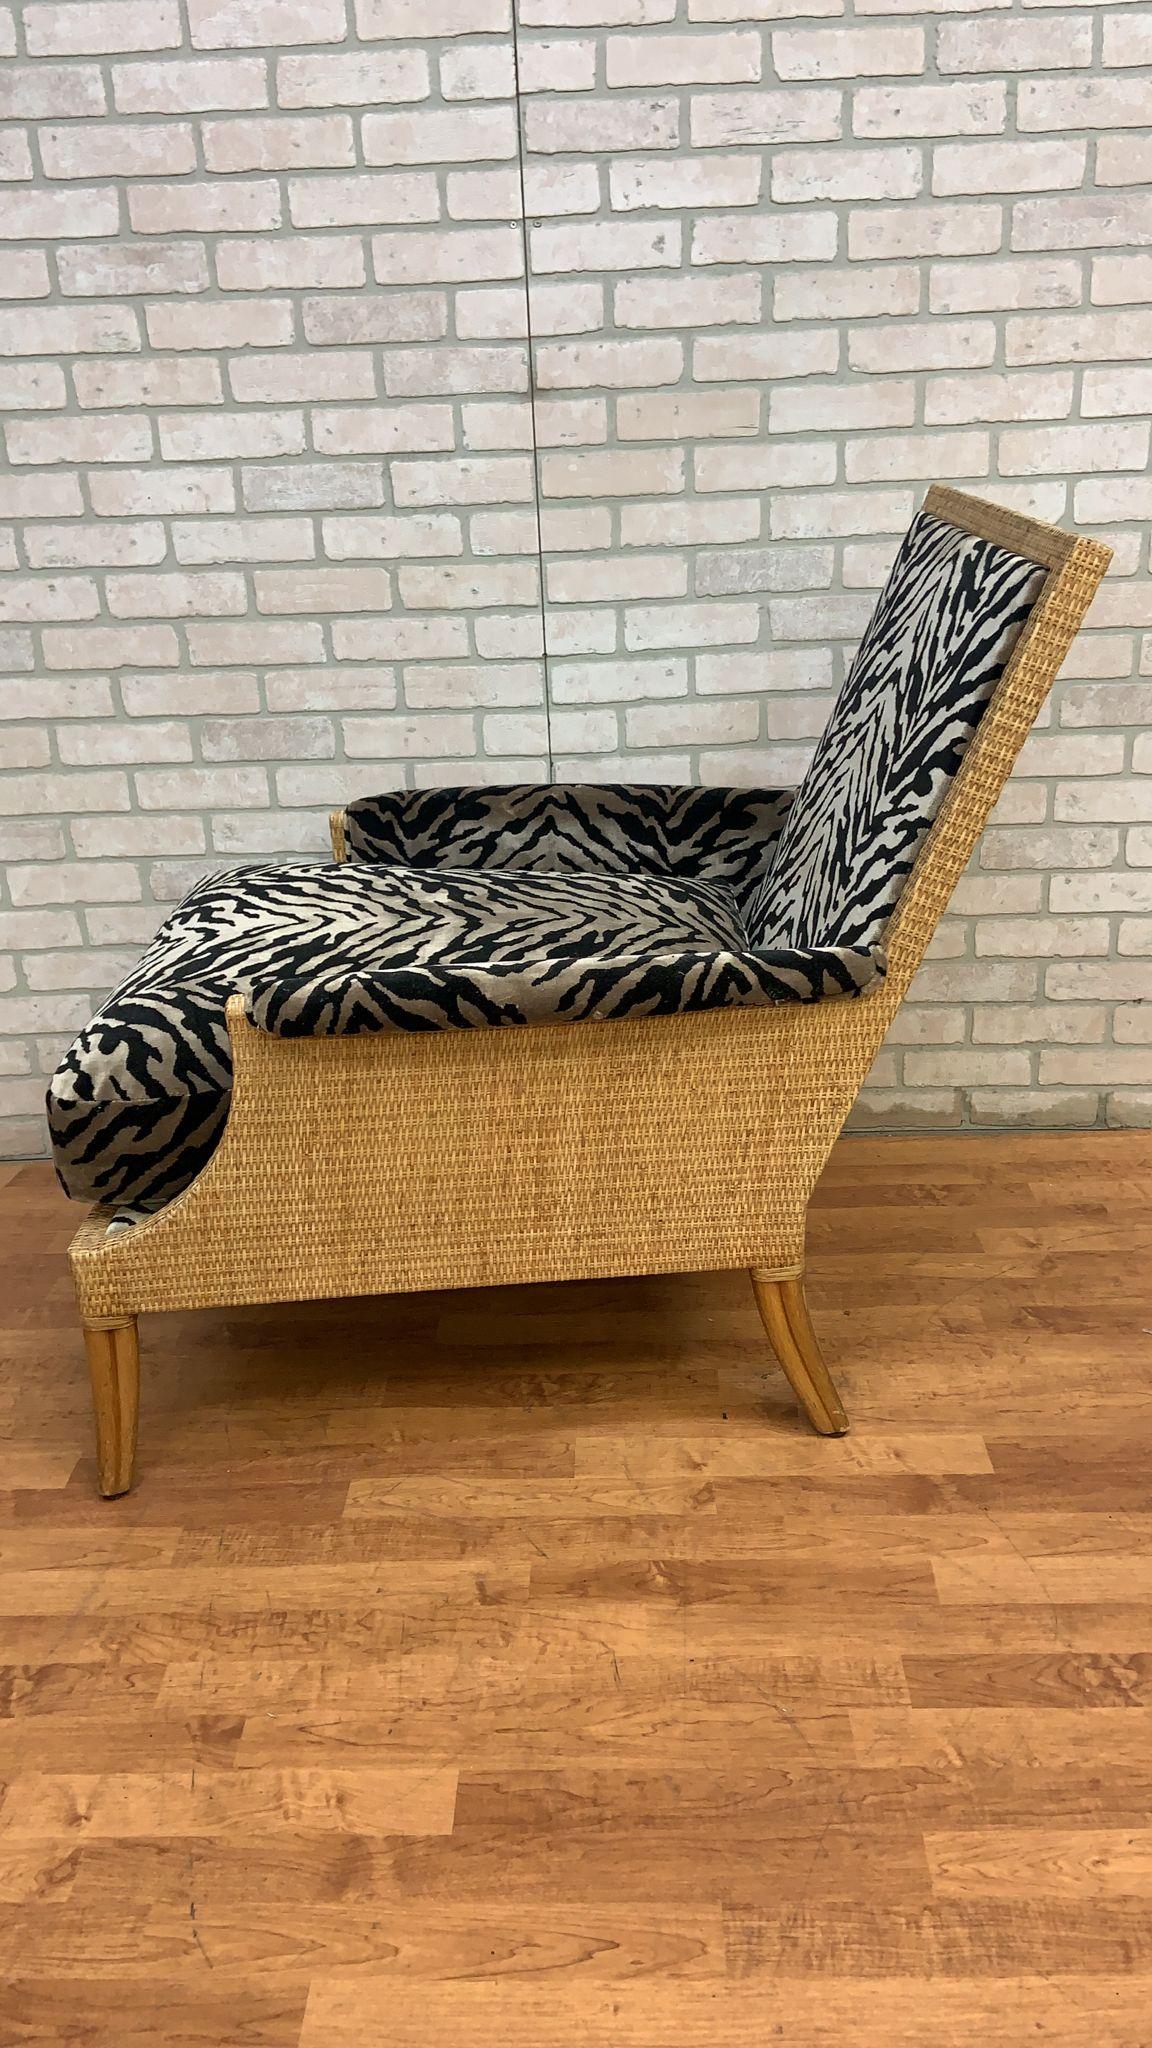 Vintage McGuire Rattan and Wicker Umbria Lounge Chair with Ottoman, 2 Piece Set For Sale 5